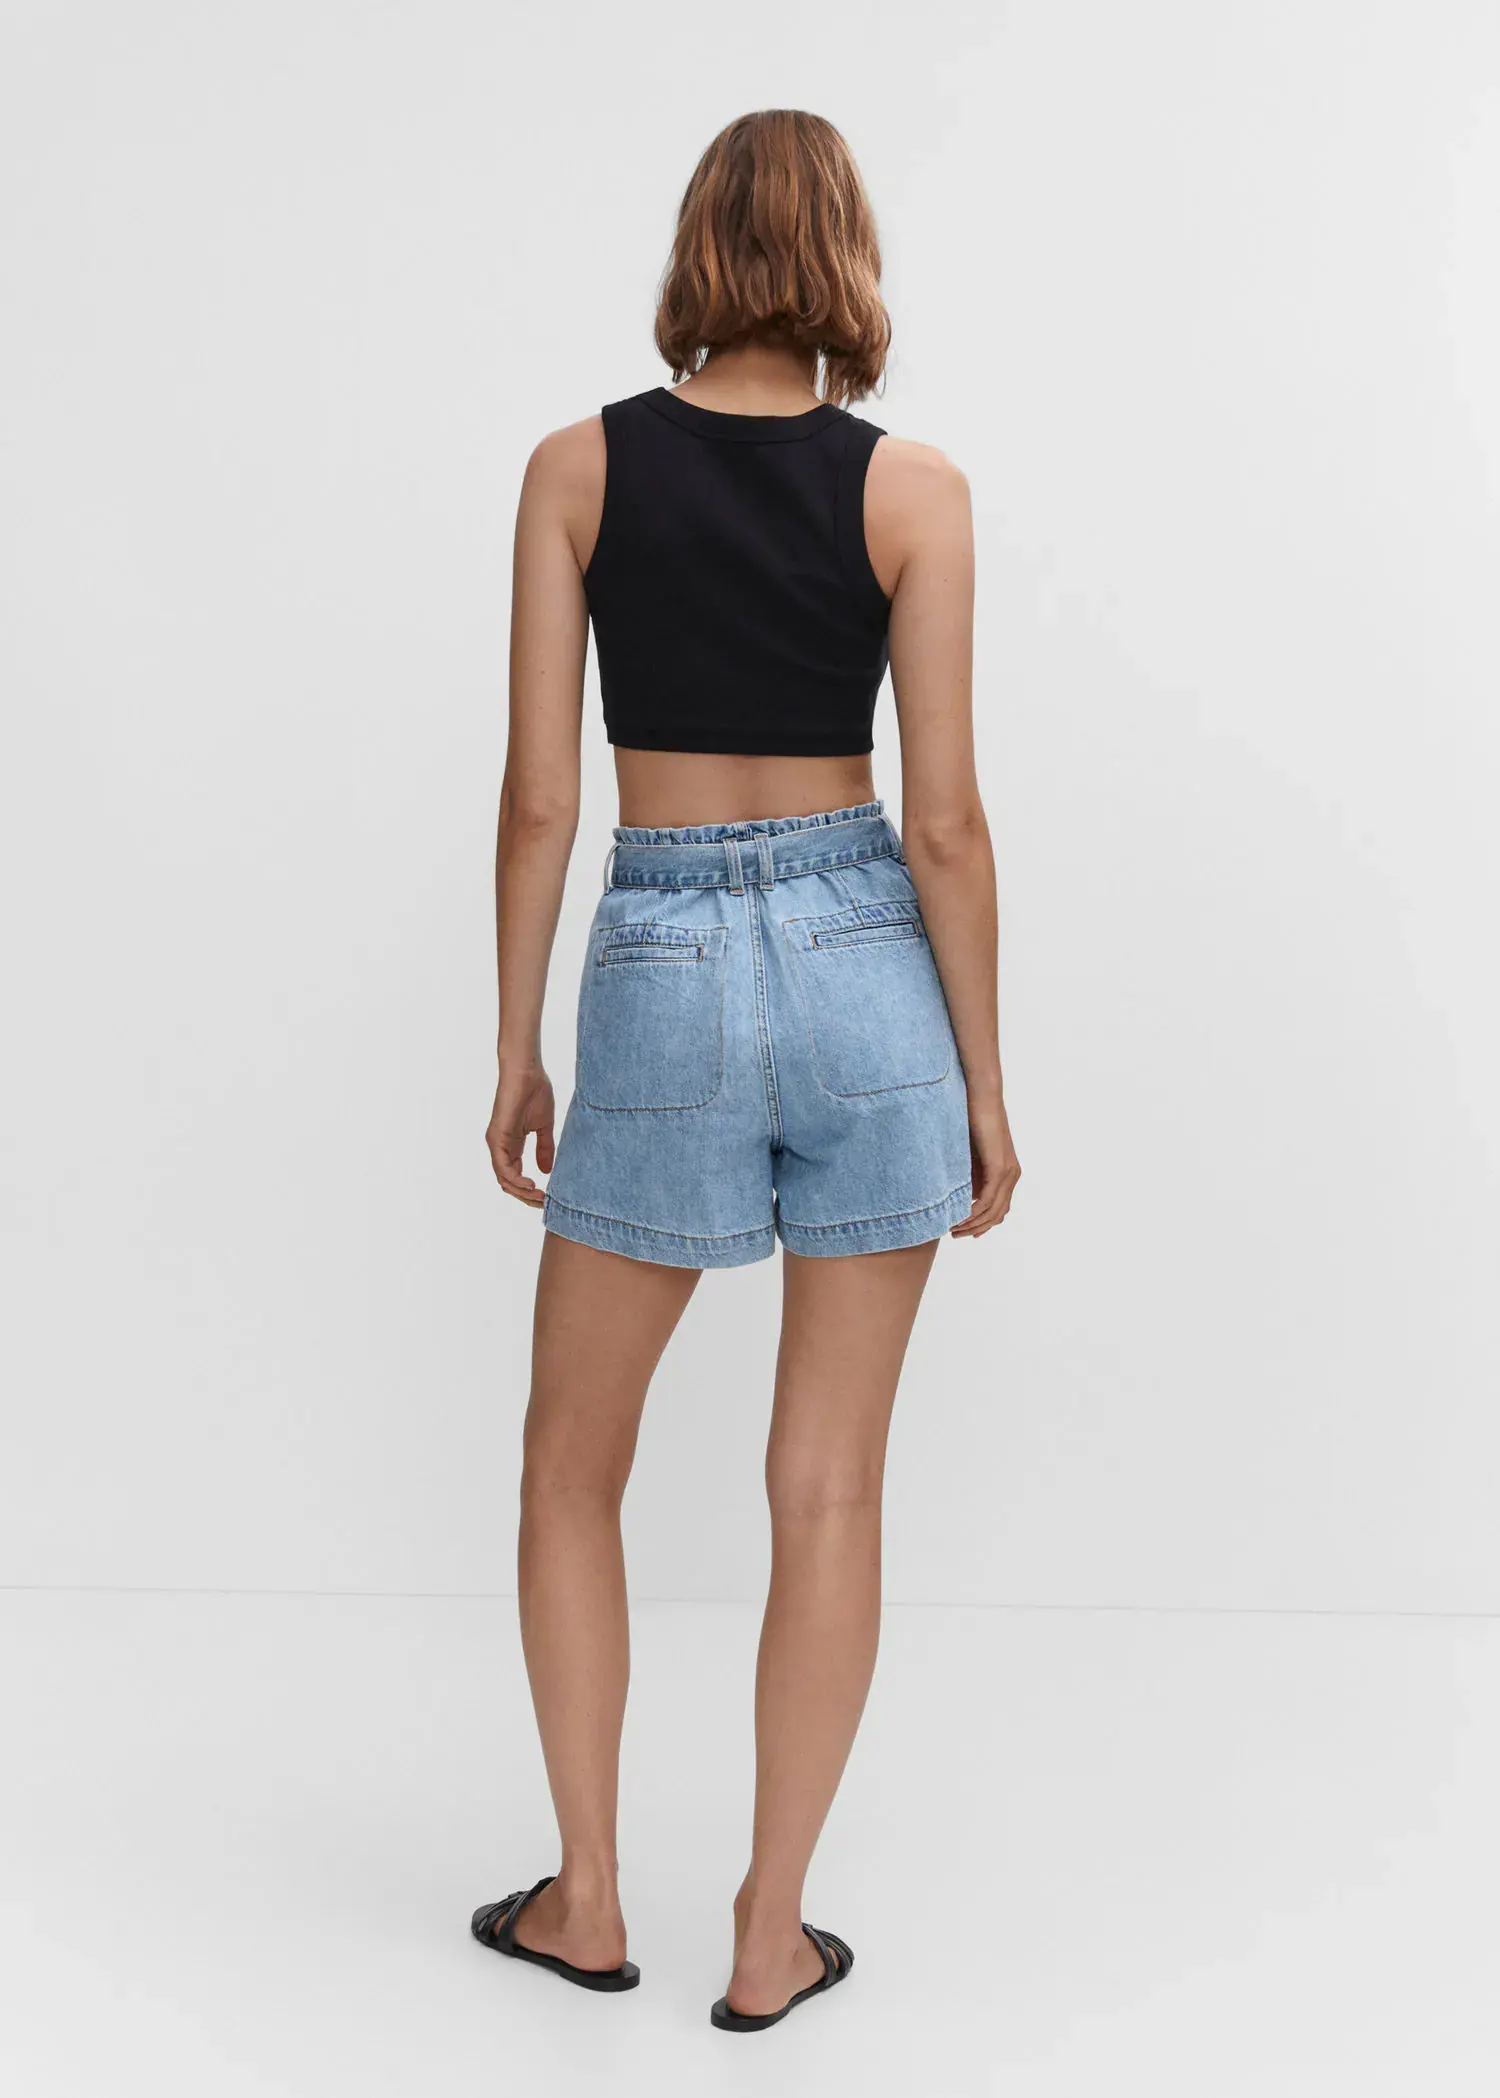 Mango Paperbag shorts with belt. a woman wearing a black crop top and light blue shorts. 